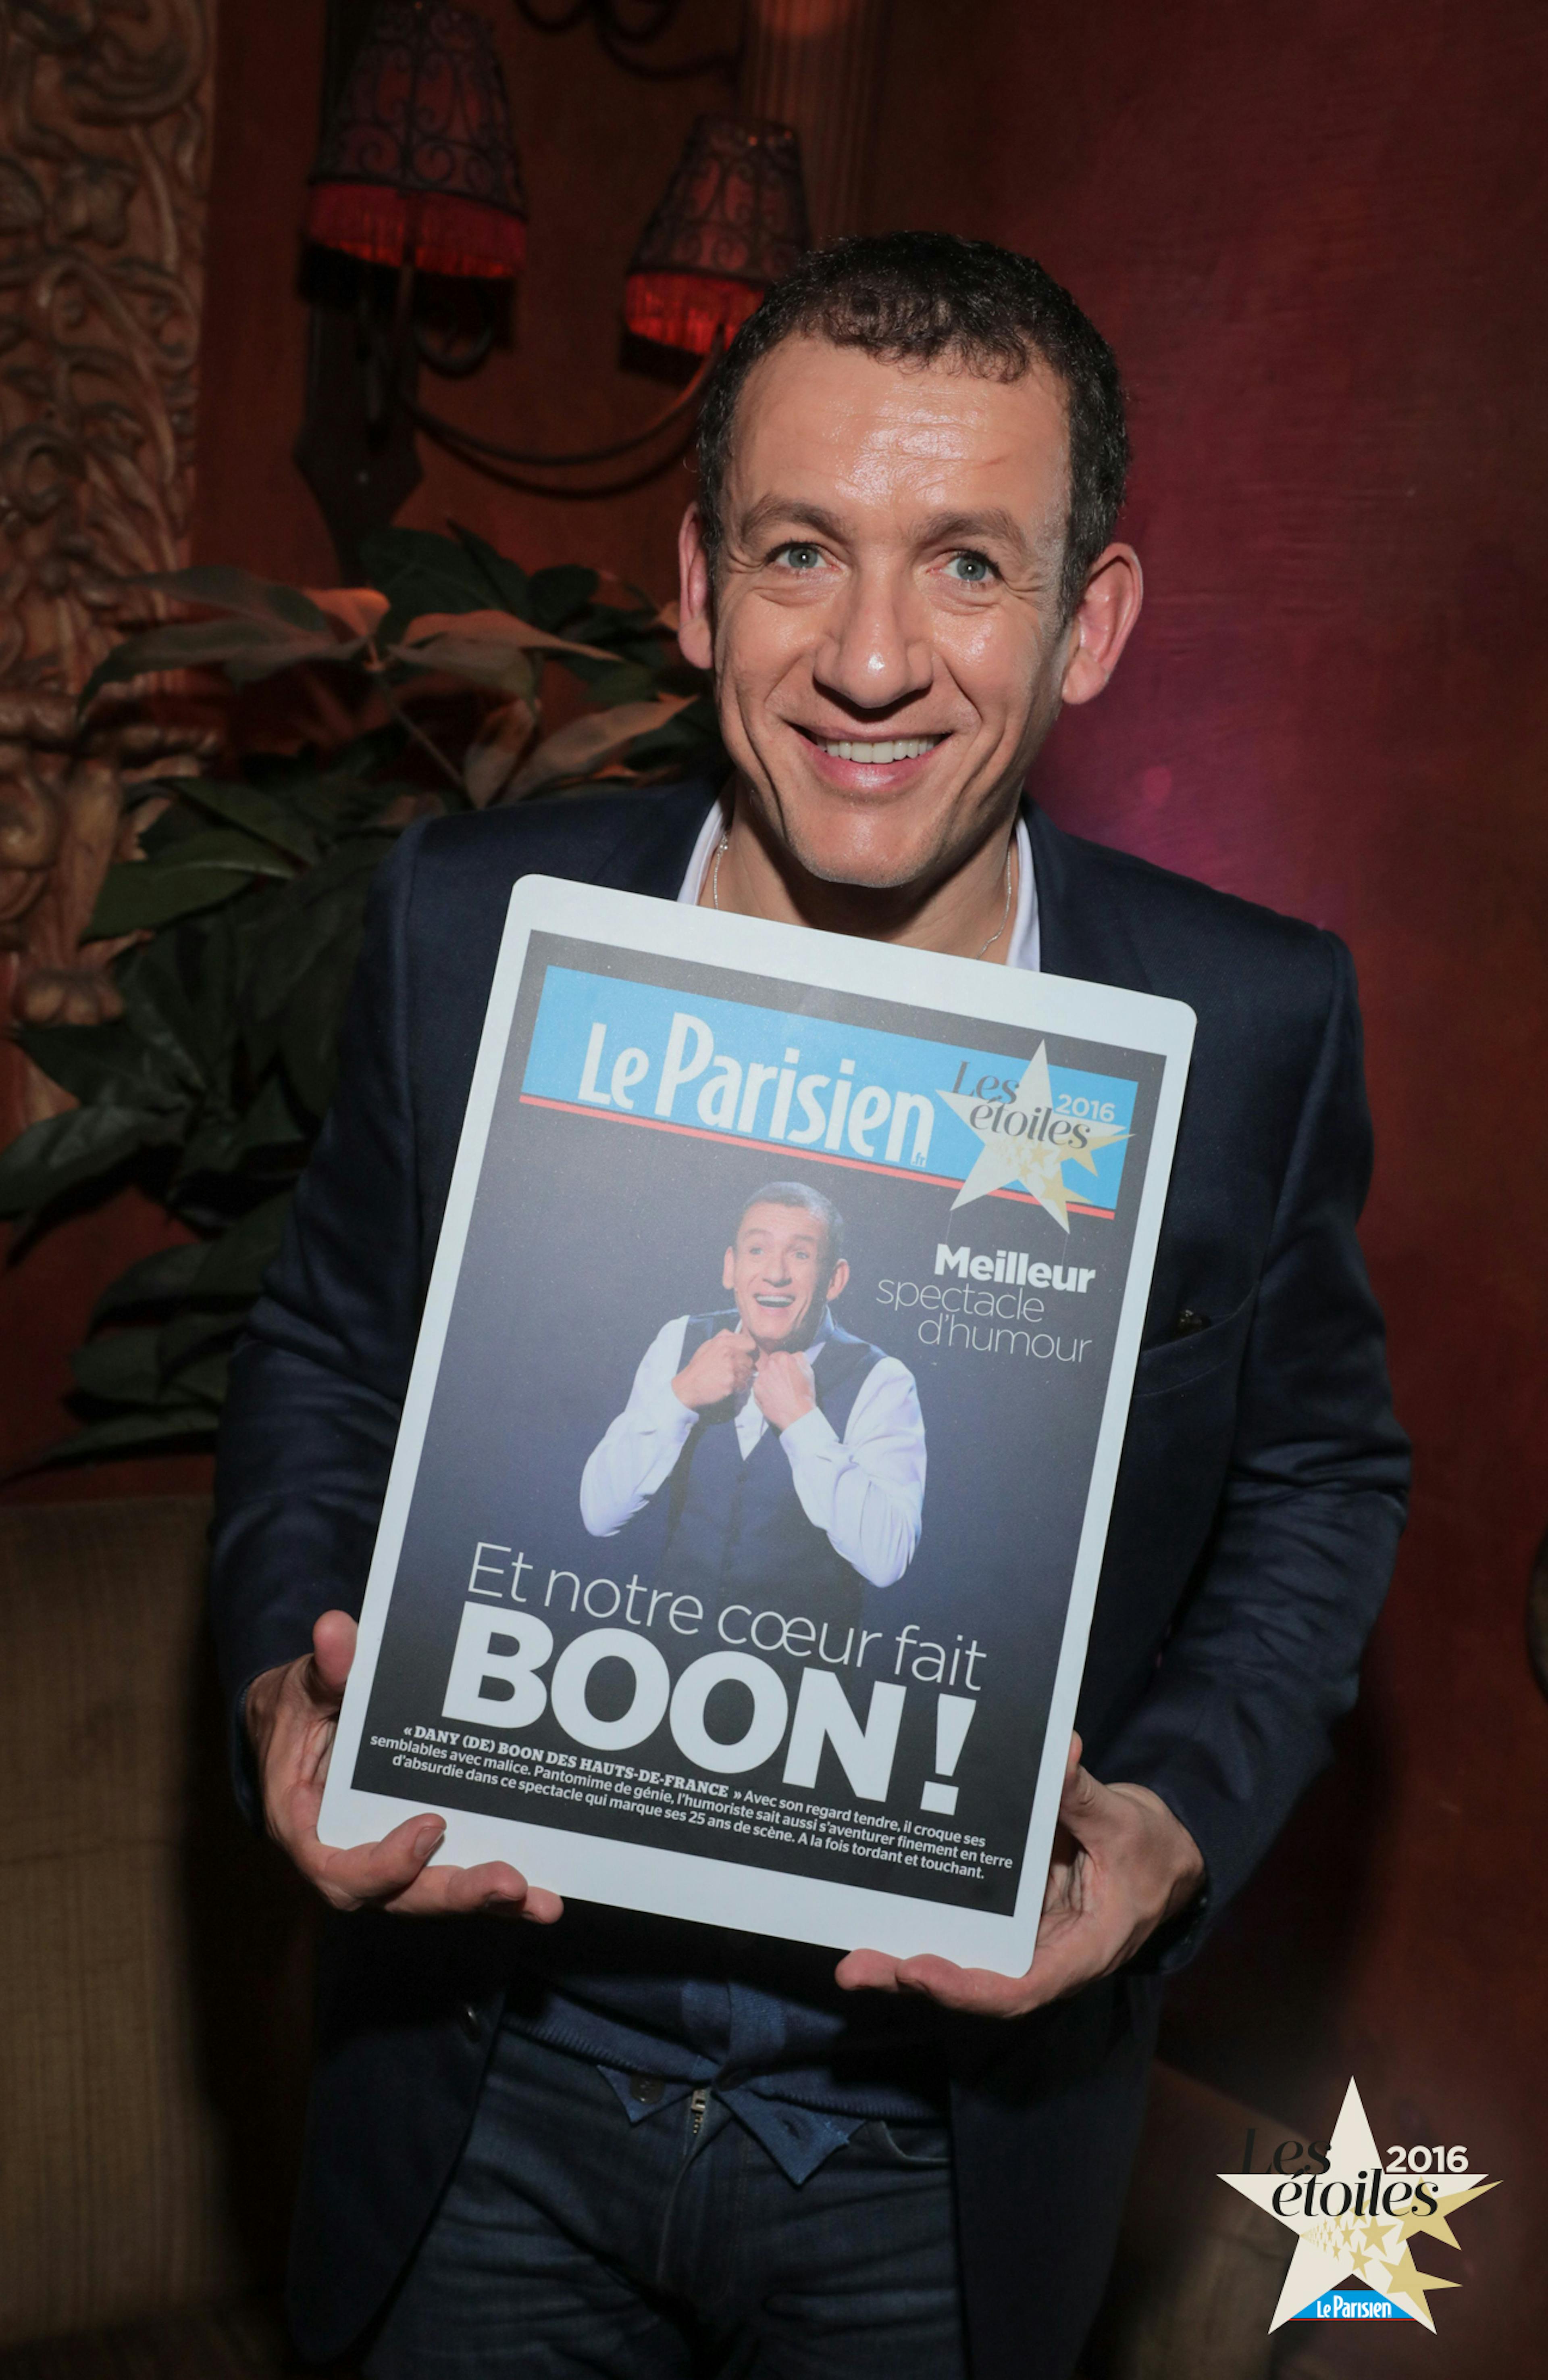 Among the many talents celebrated by the editors of Le Parisien-Aujourd’hui en France in a variety of fields (from circus and radio to publishing and television), actor and comedian Dany Boon was honored for the best comedy show of the year. © Le Parisien/Frédéric Dugit